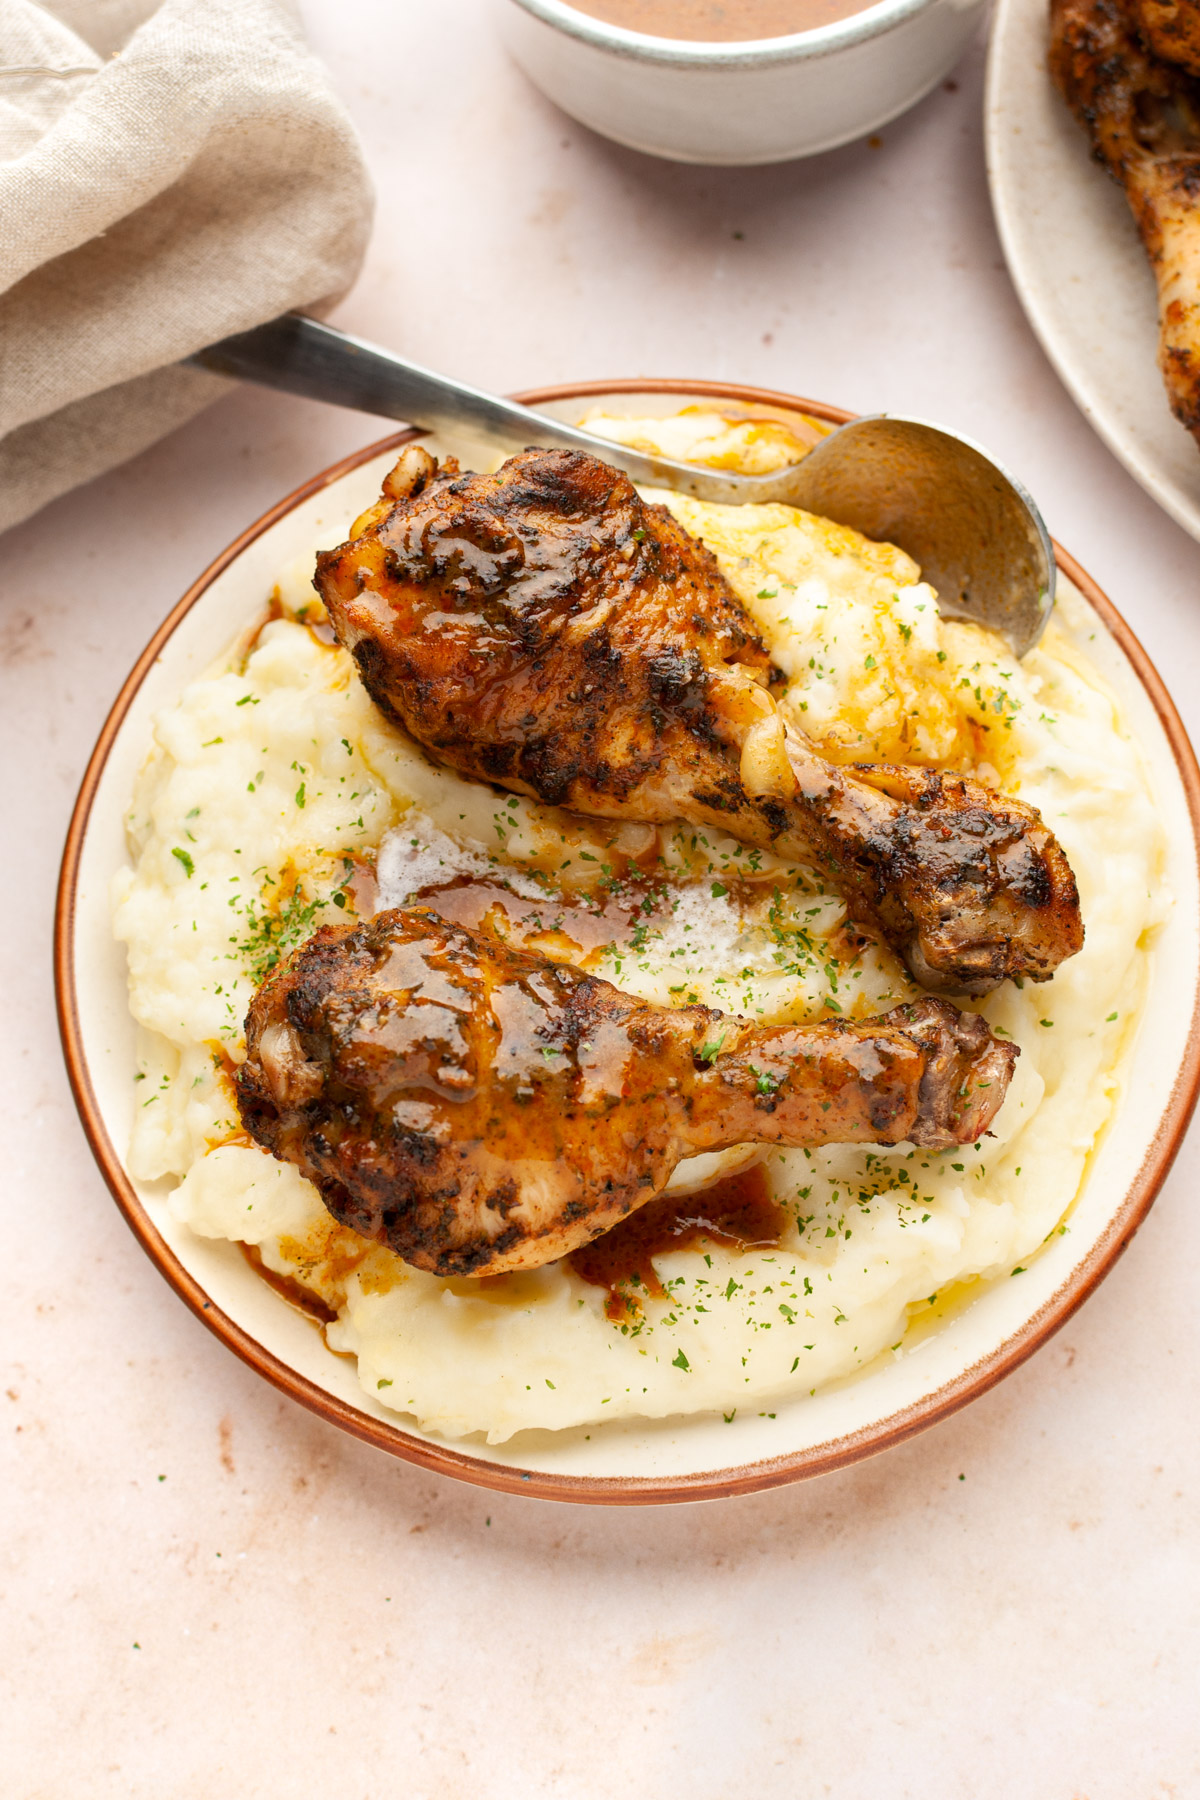 Instant pot chicken drumsticks on a bed of mashed potatoes in a plate.